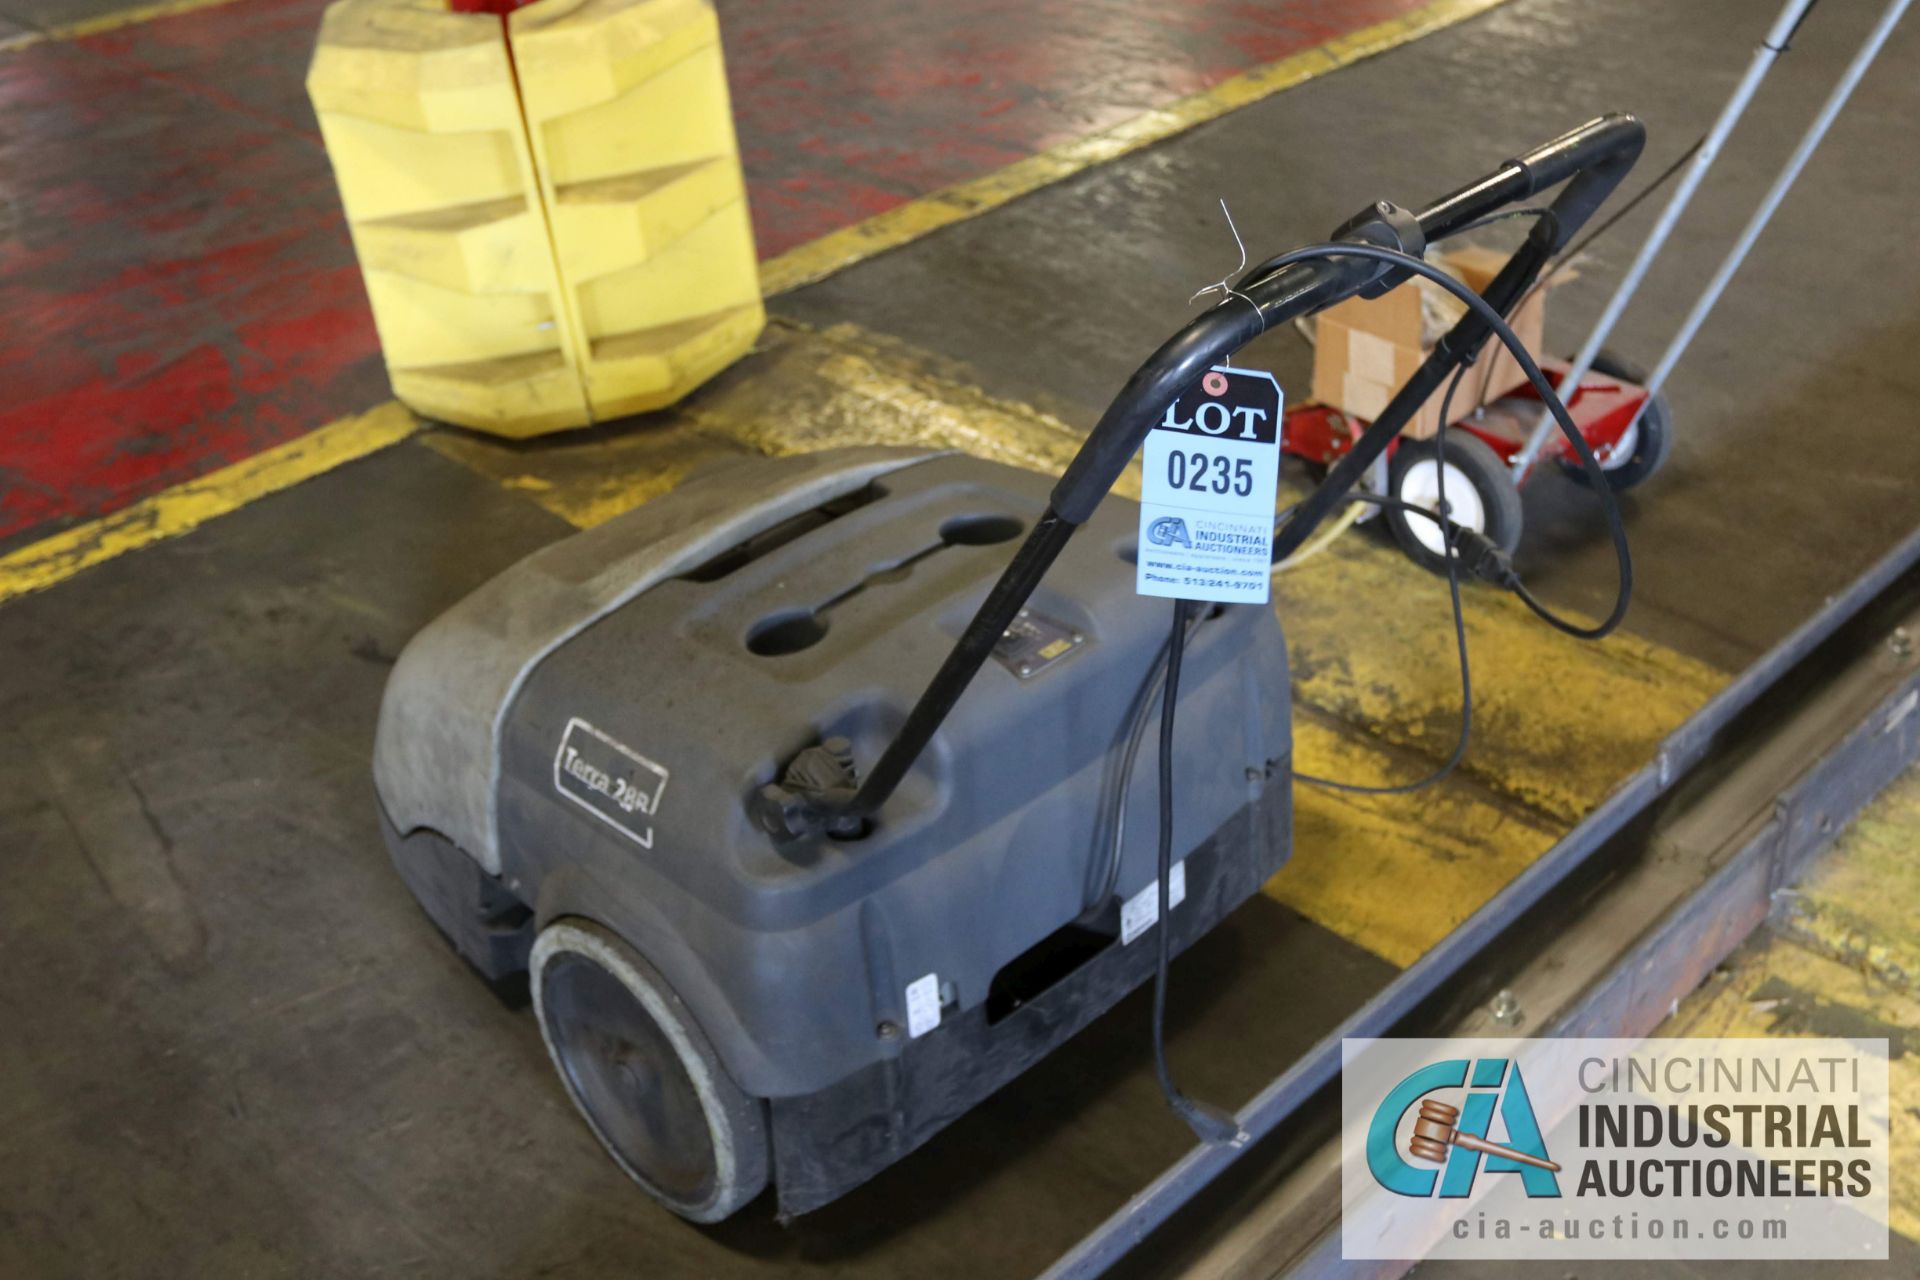 ADVANCED MODEL 28B TERRA POWERED FLOOR SWEEPER - $20.00 Rigging Fee Due to Onsite Rigger - Located